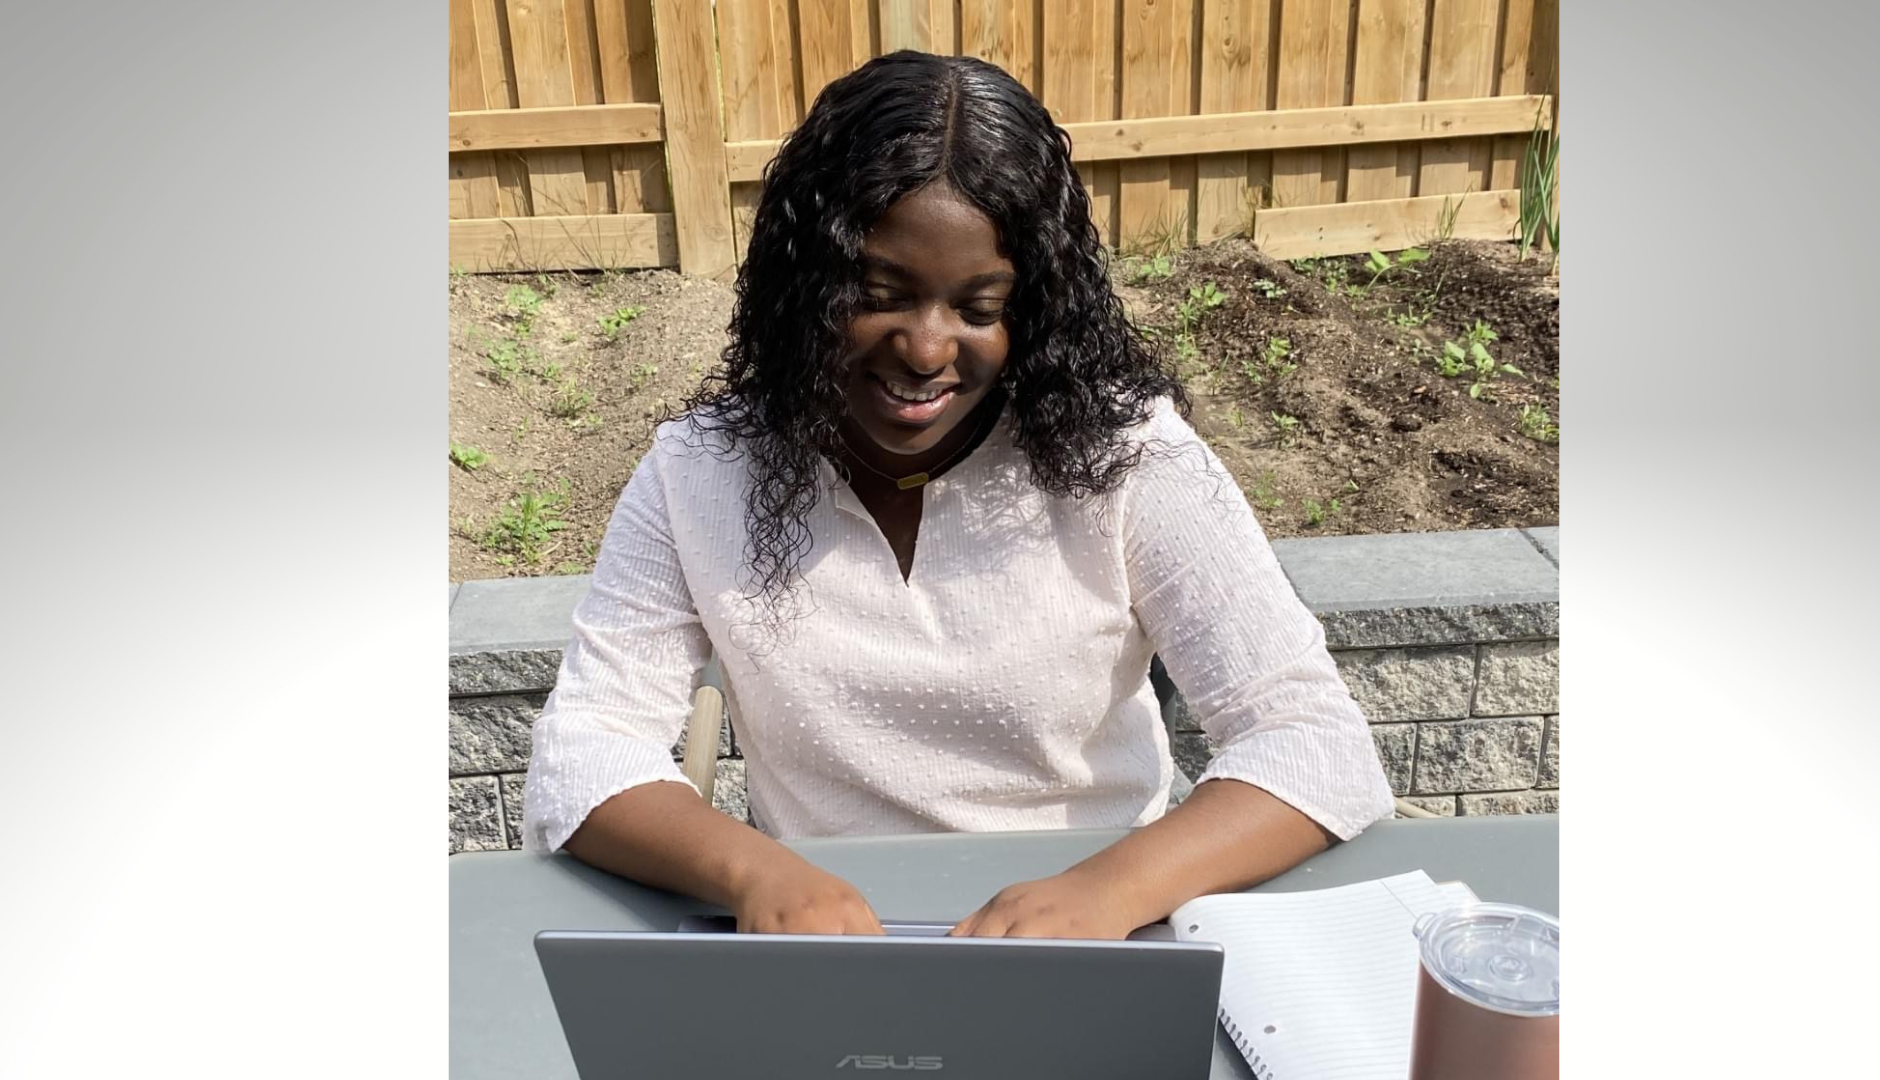 Eyitayo working from a desk outdoors